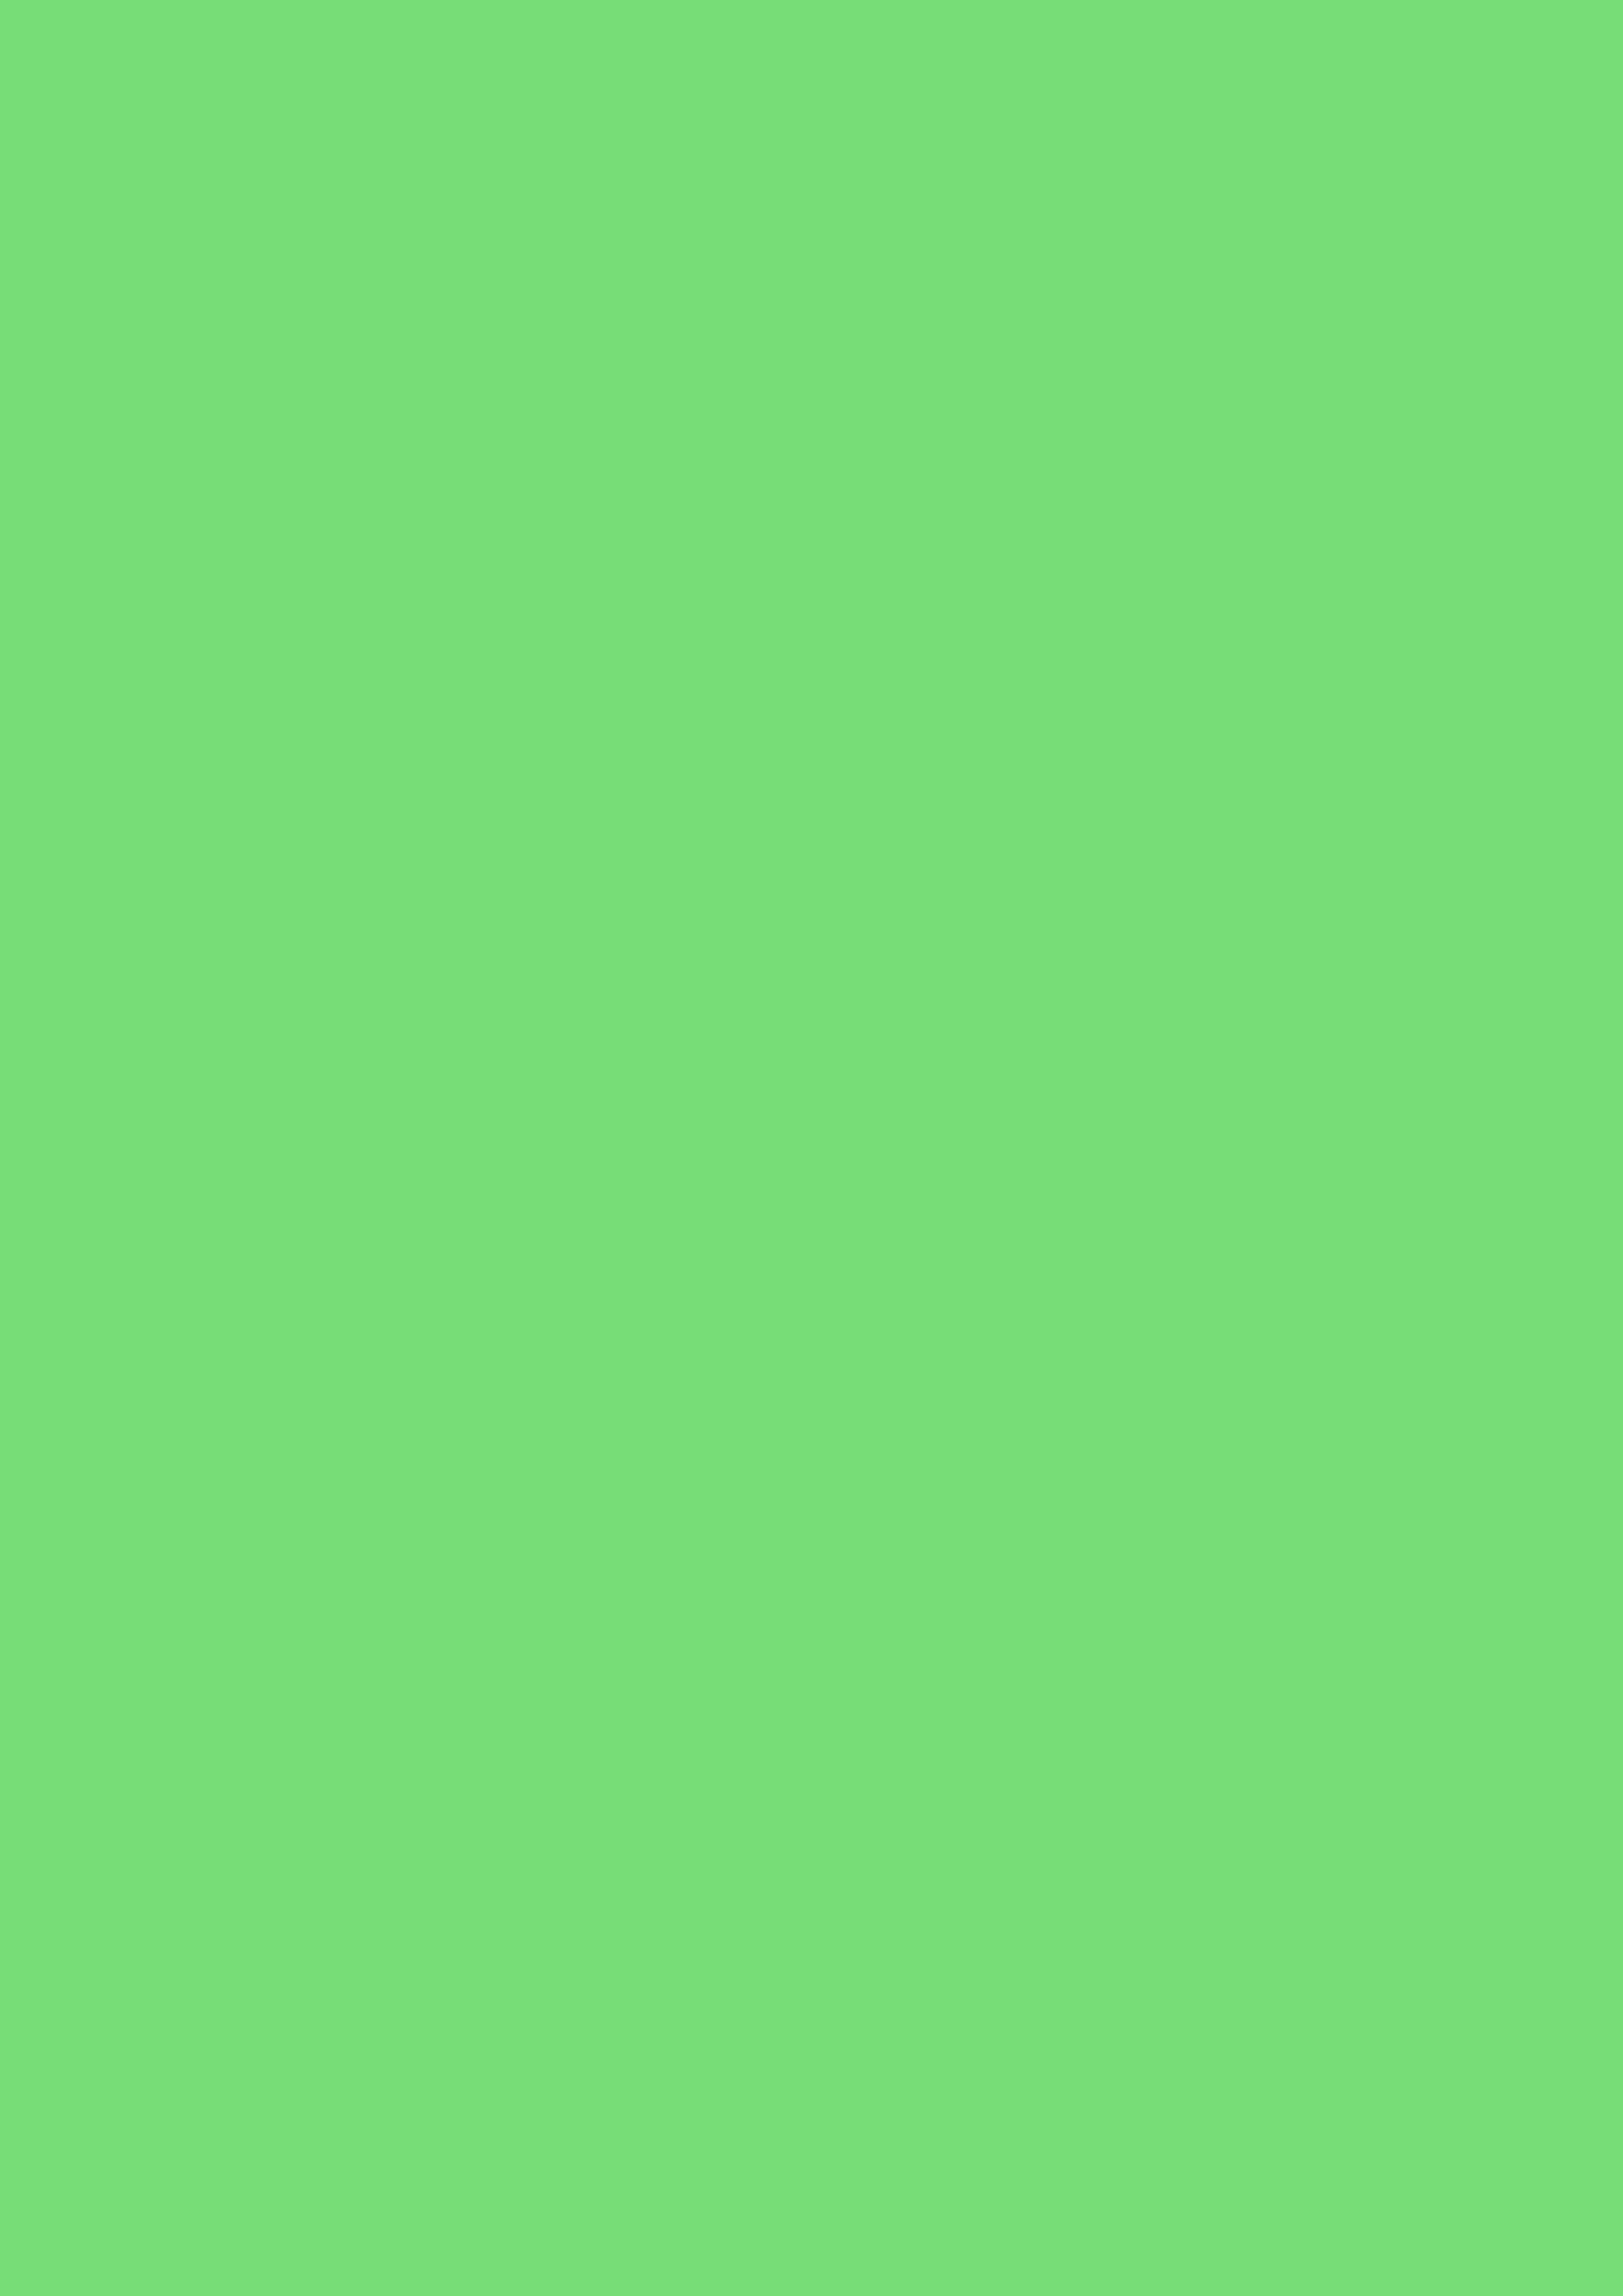 2480x3508 Pastel Green Solid Color Background